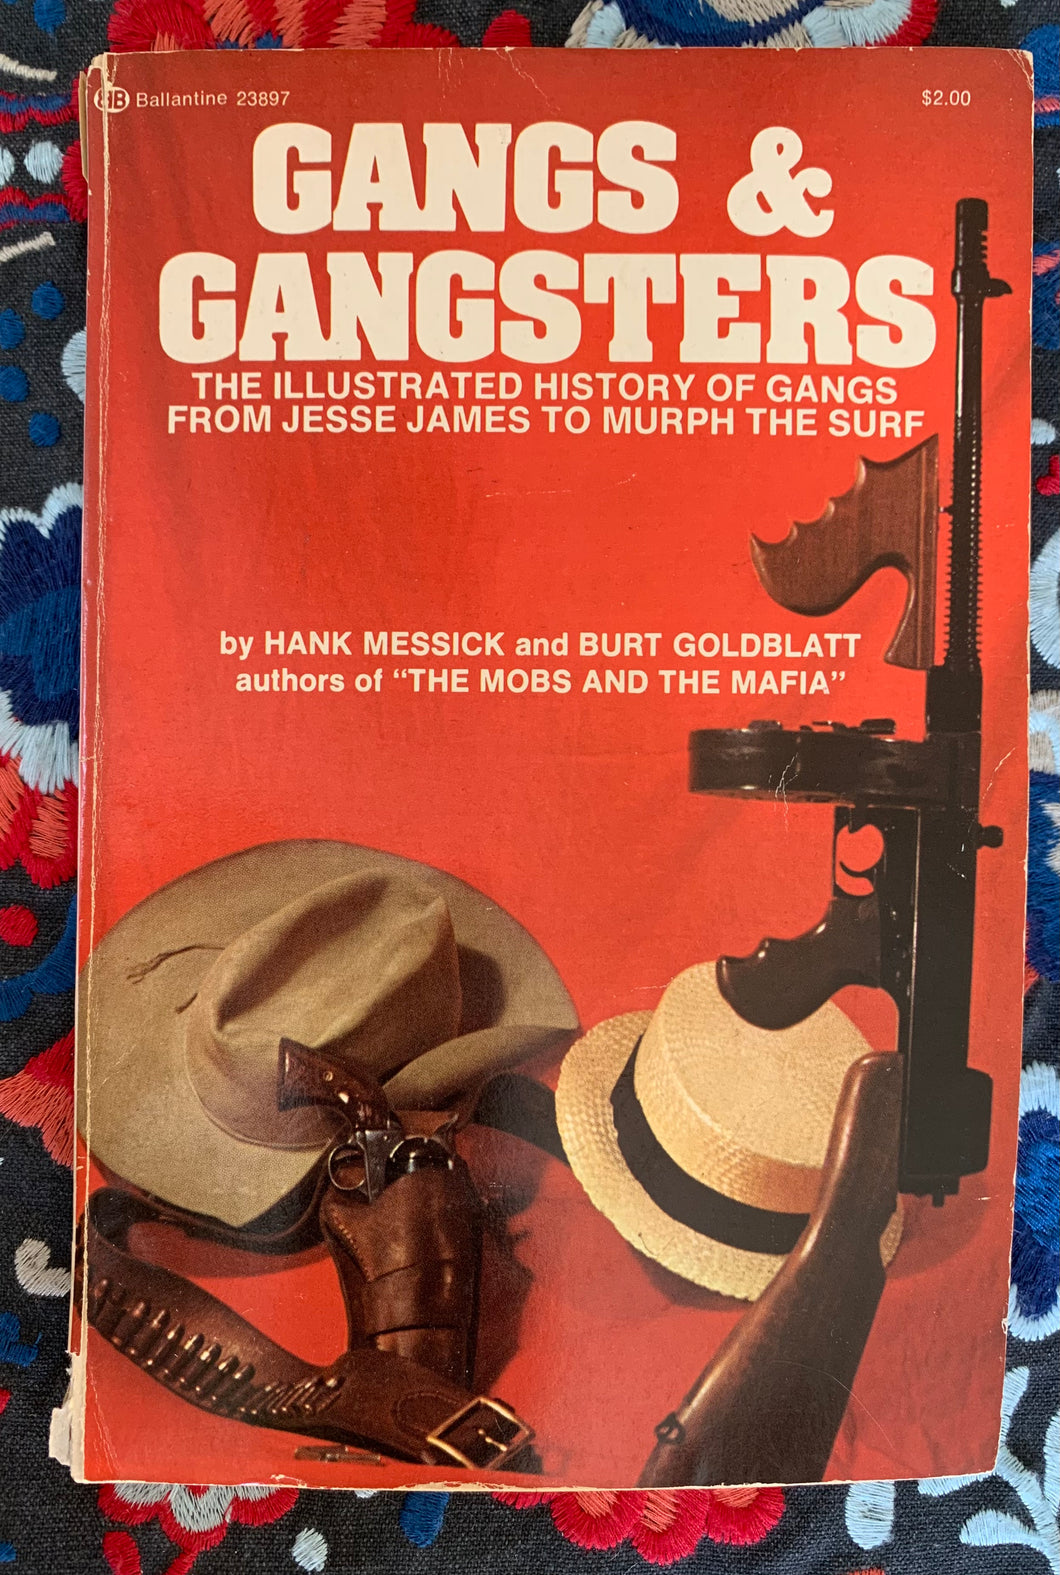 Gangs & Gangsters: The Illustrated History Of Gangs From Jesse James To Murph The Surf